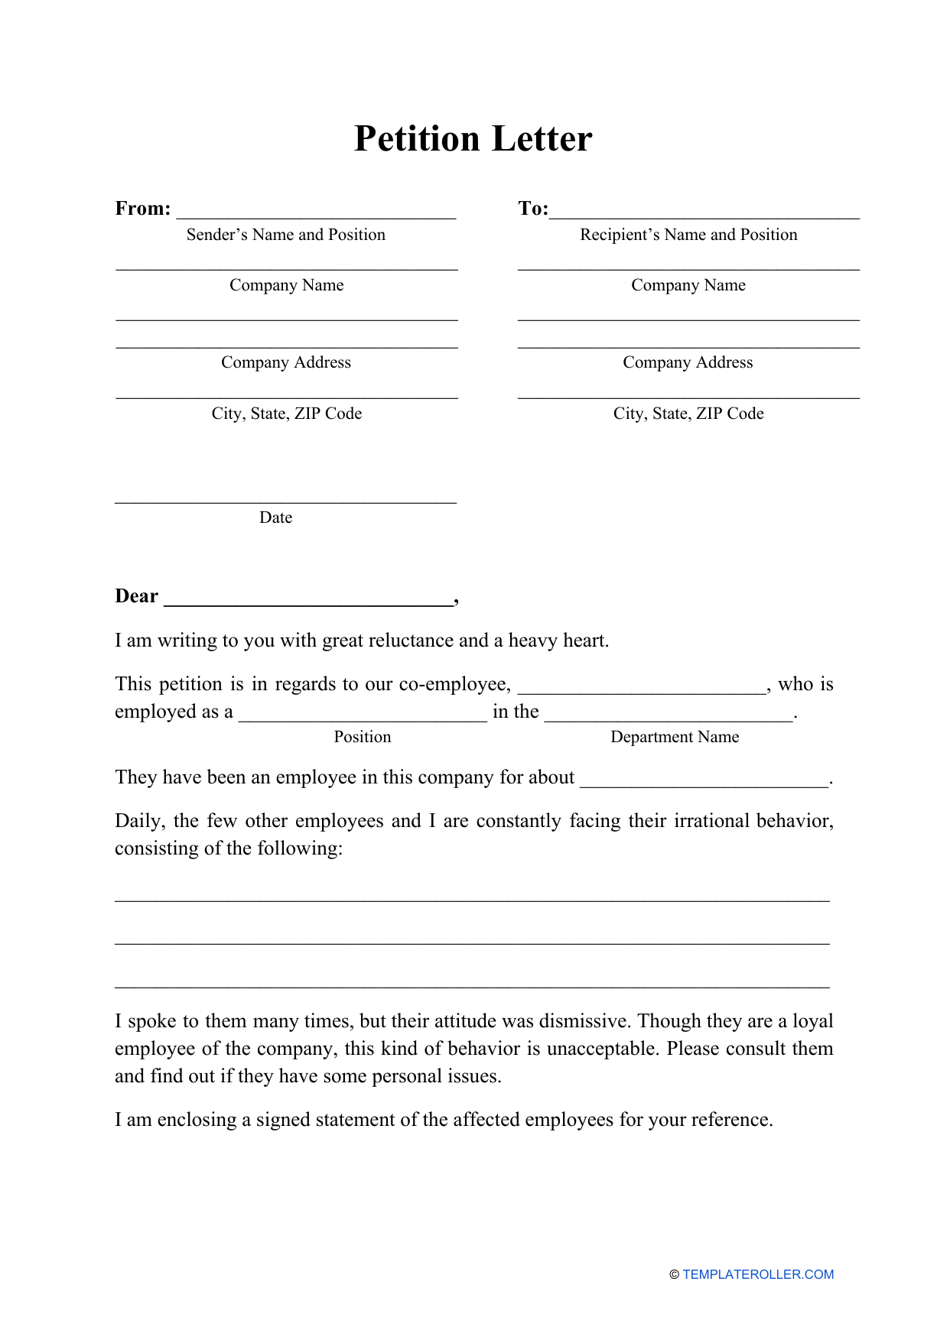 Petition Letter Template Download Printable PDF  Templateroller